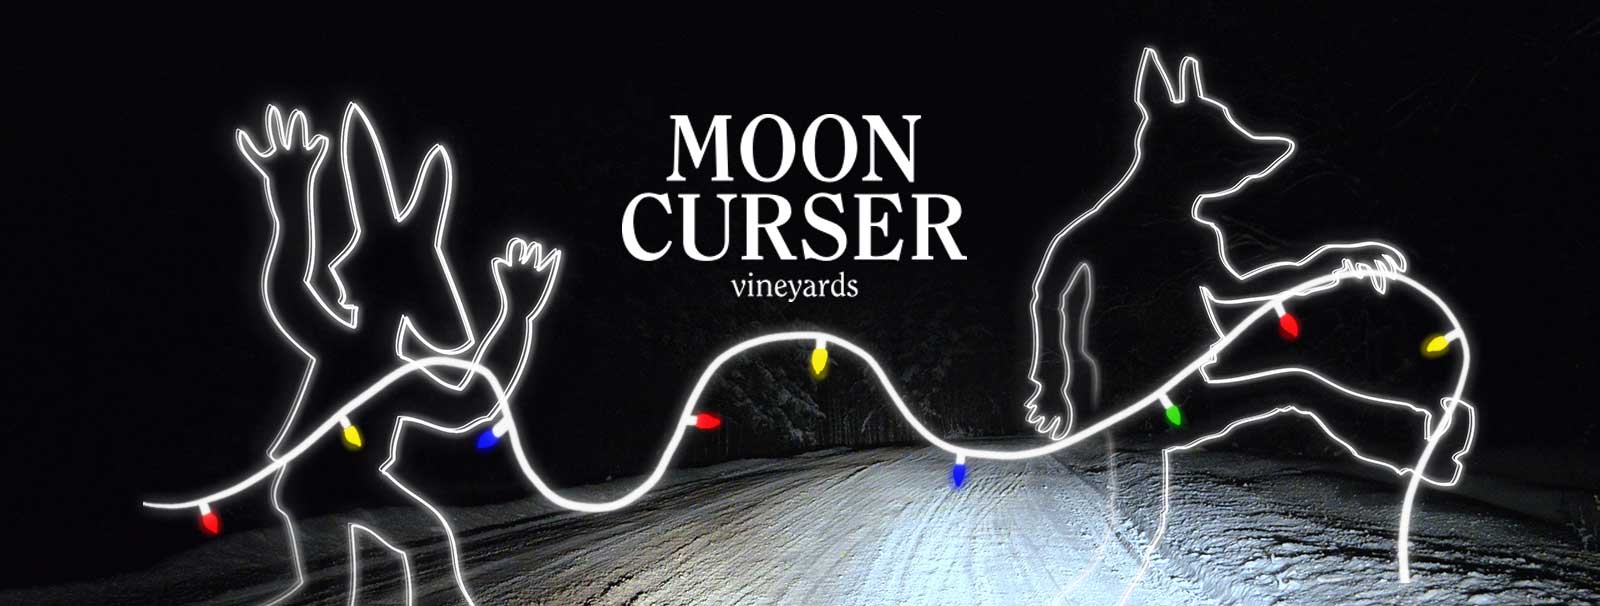 MC Christmas light banner logo01 1600px 1: Two Weekends of Winter in Wine Country at Moon Curser '23